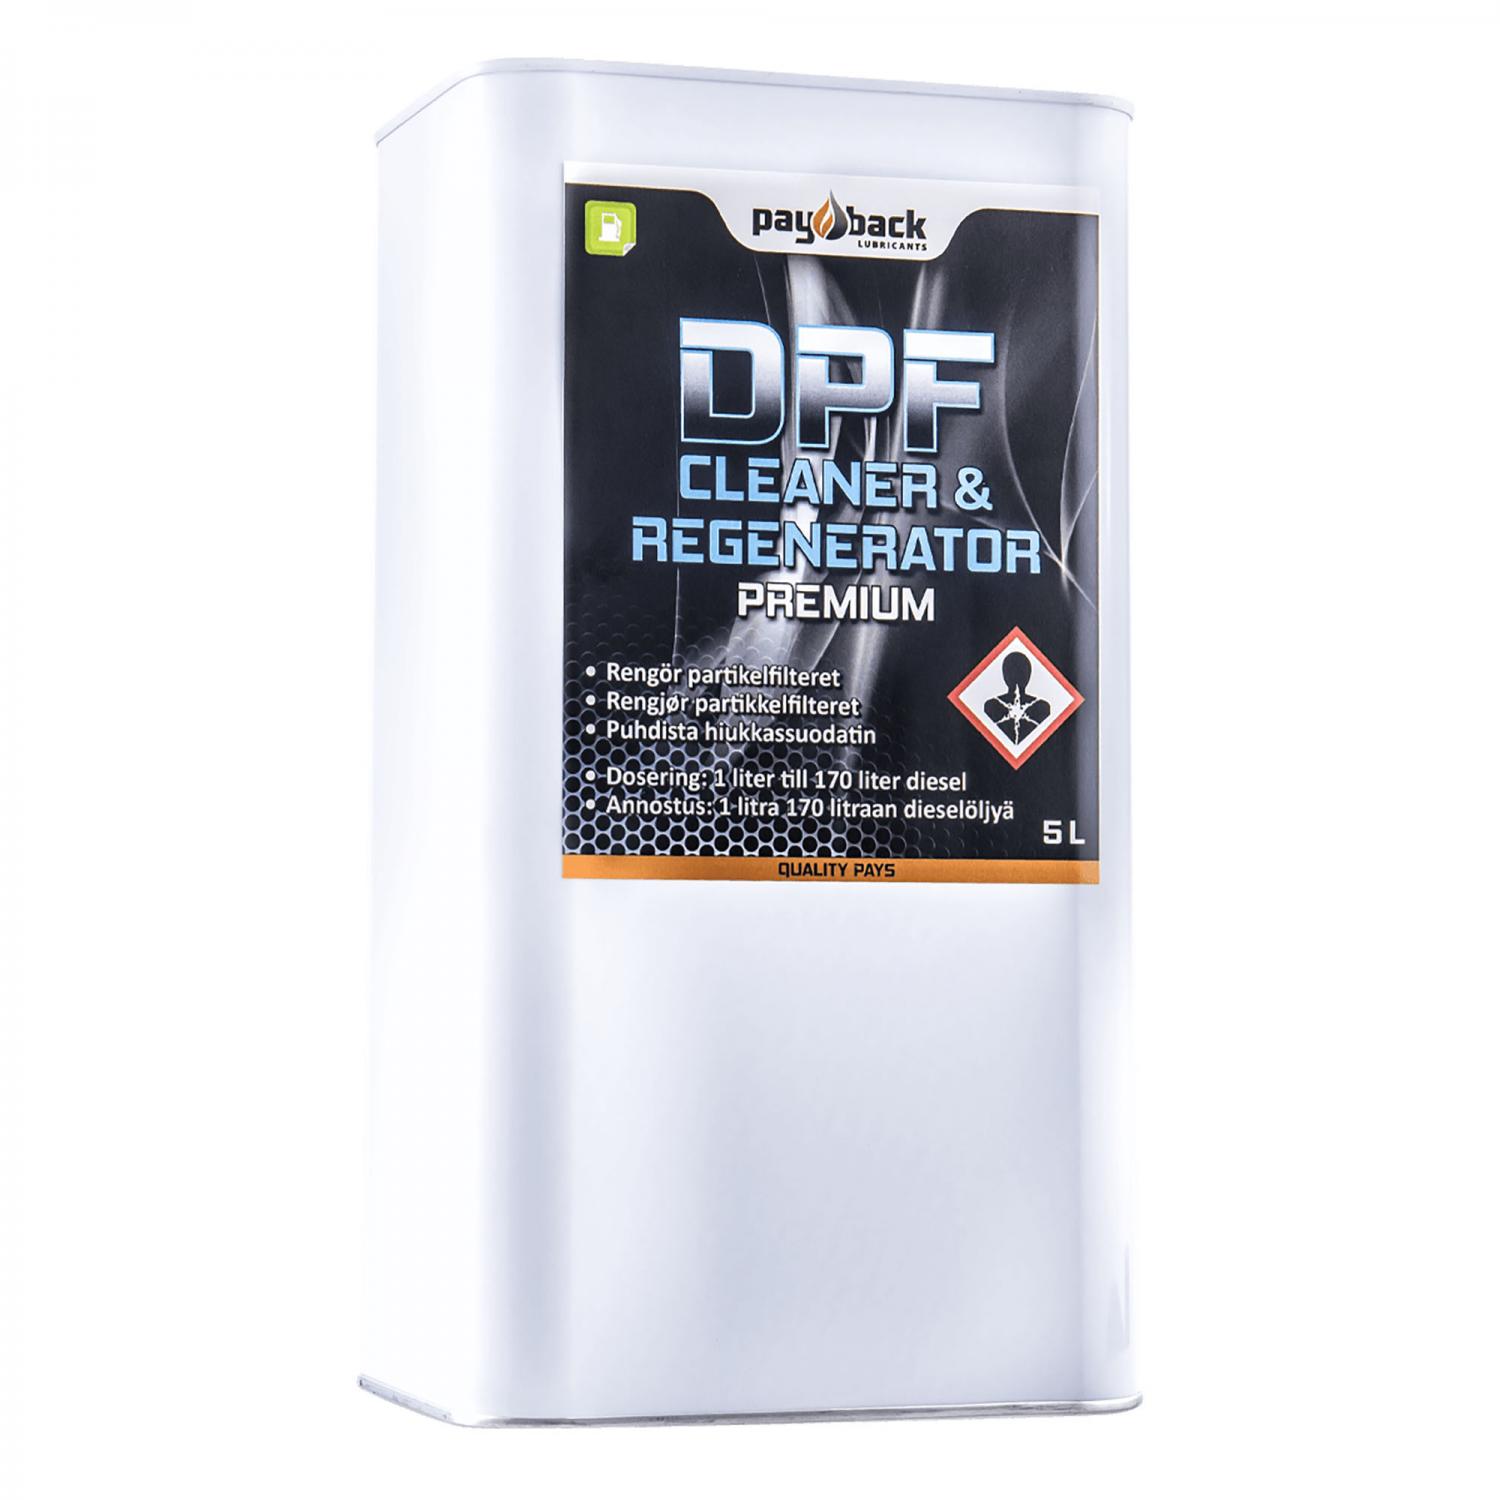 Payback #491 DPF Cleaner II 5Liter